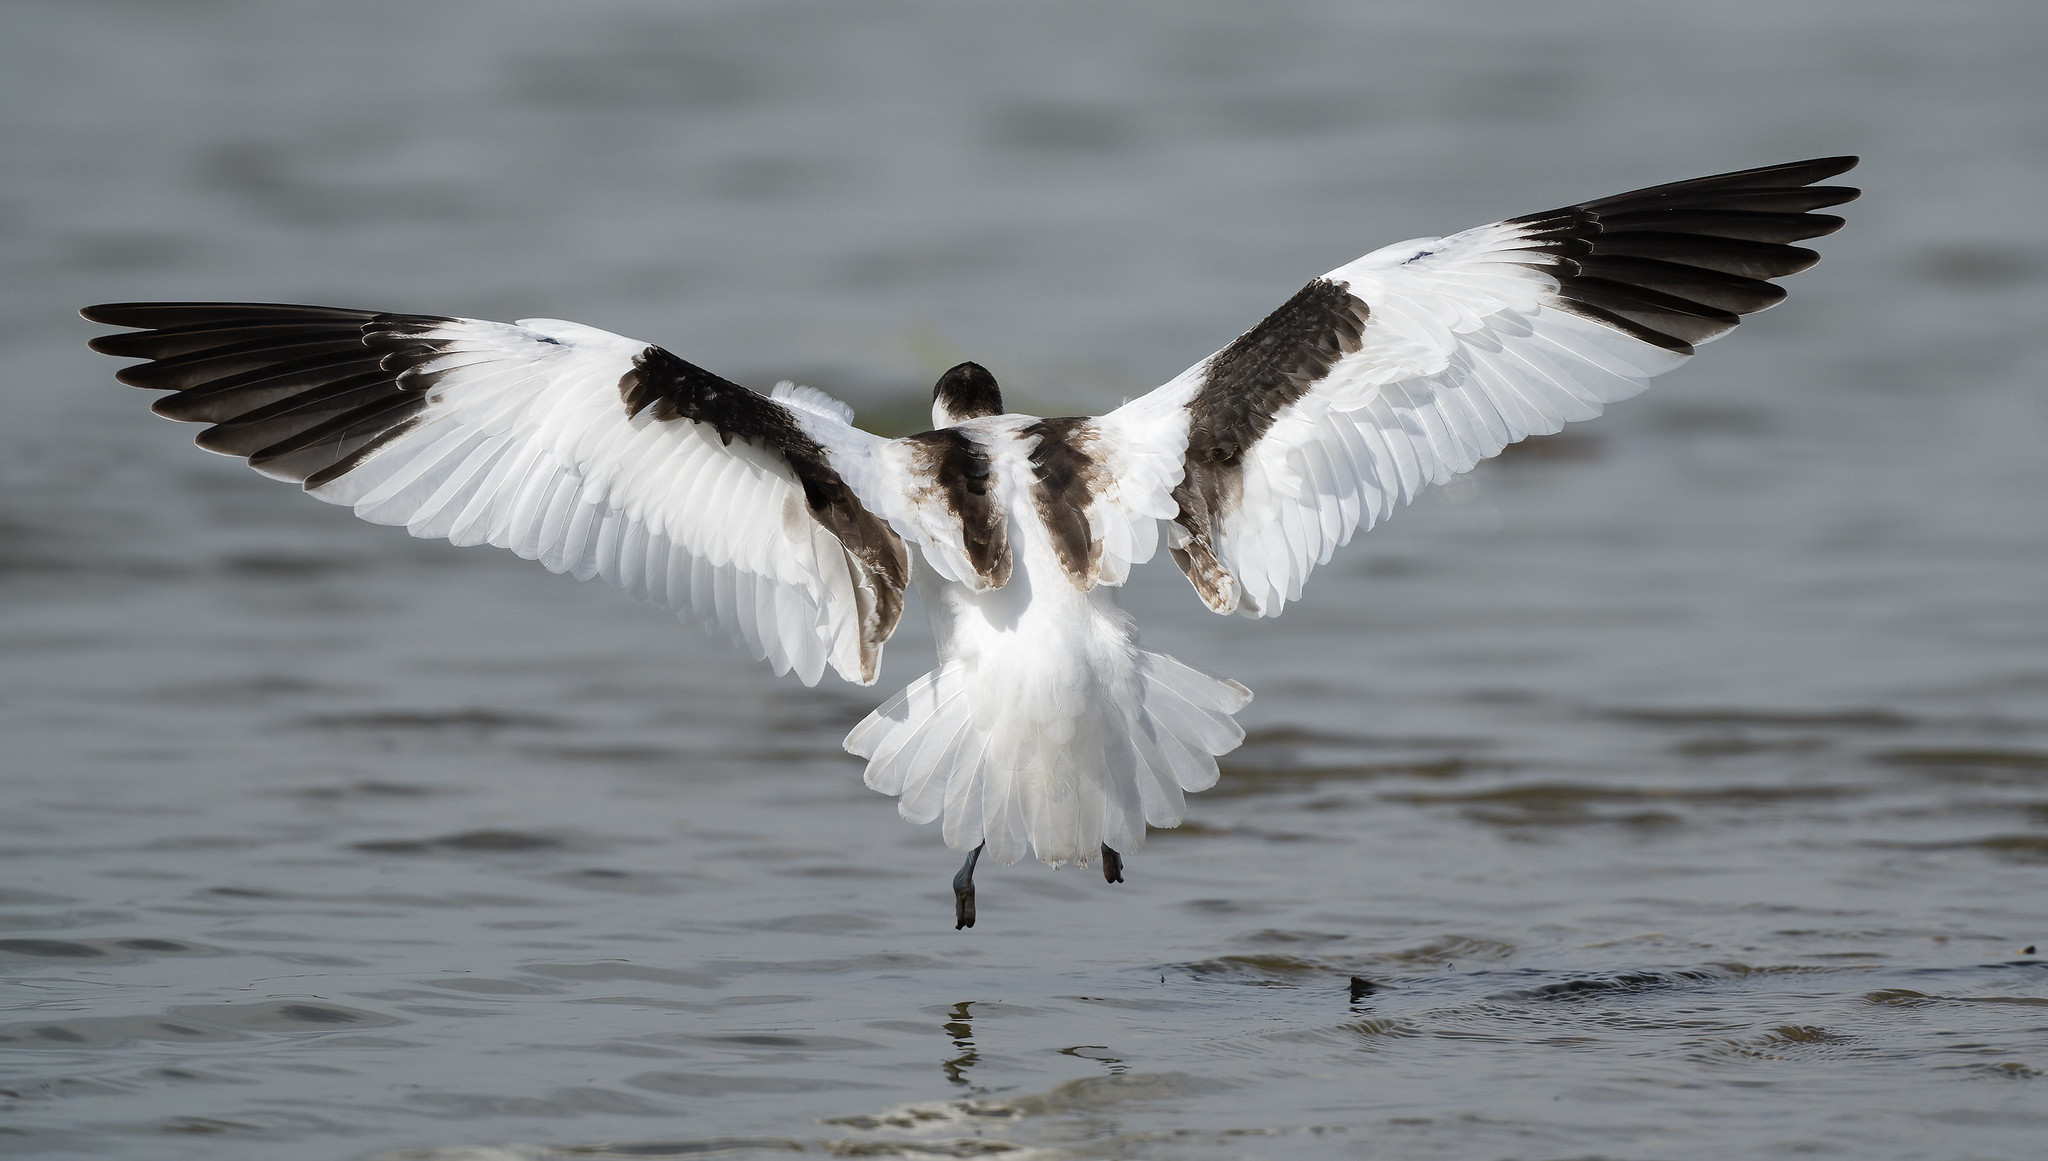 Avocet - I know it's from the back, but I liked the feather details....